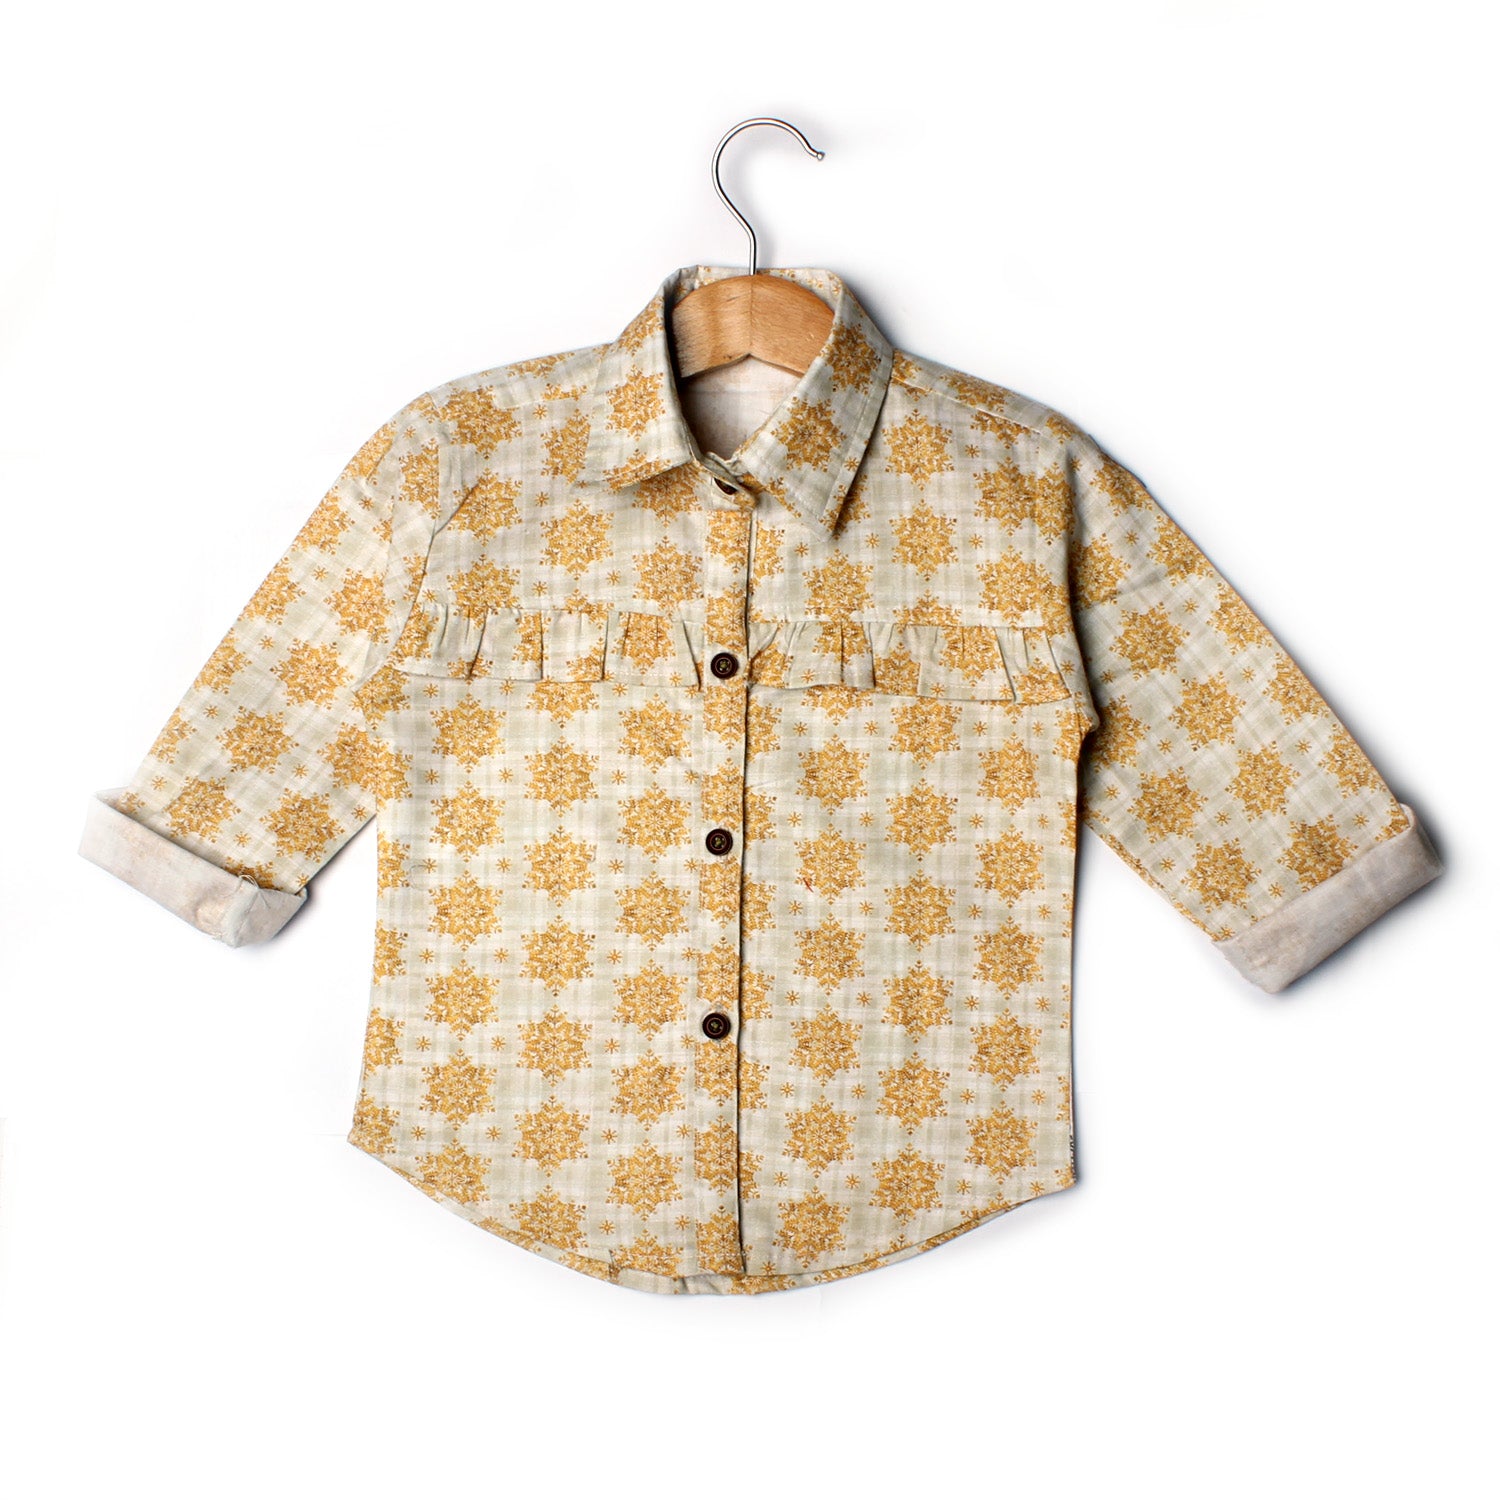 CREAM WITH GOLDEN LEAF PRINTED CASUAL SHIRT FOR GIRLS